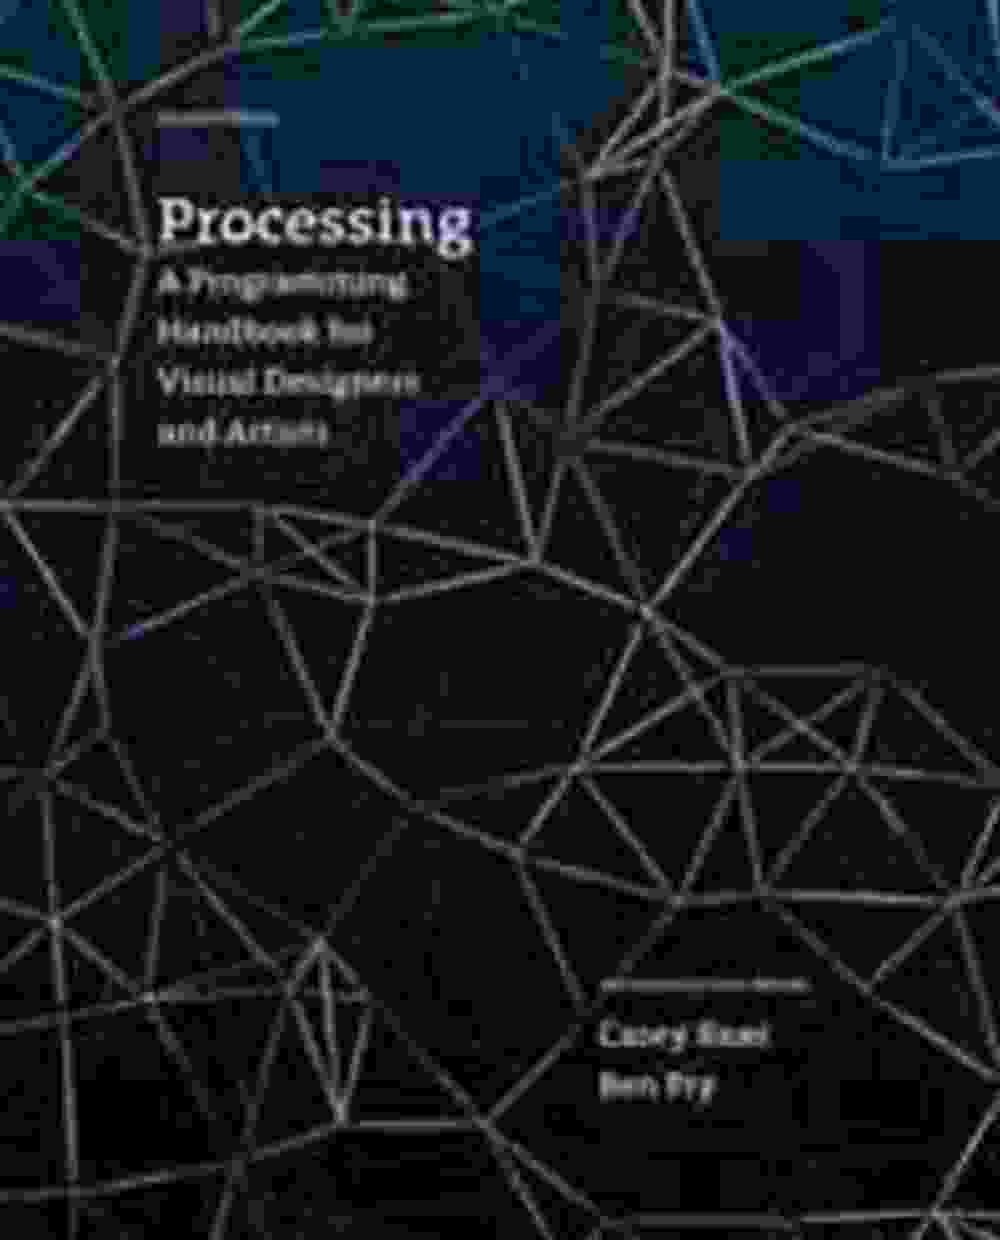 PROCESSING: A PROGRAMMING HAND...